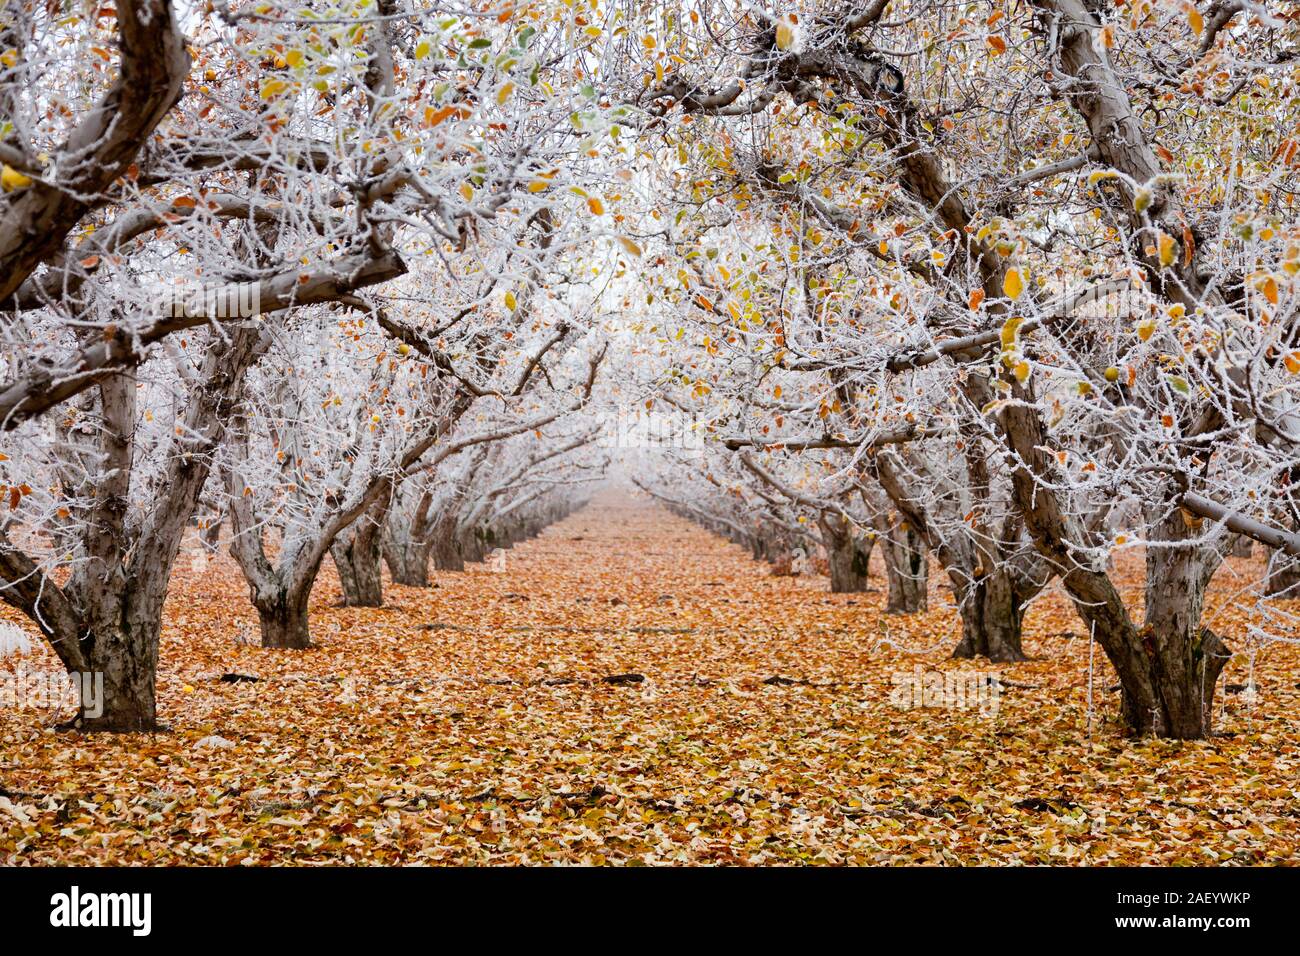 Golden Delicious apple orchard with hoarfrost on the branches and autumn leaves in winter Stock Photo